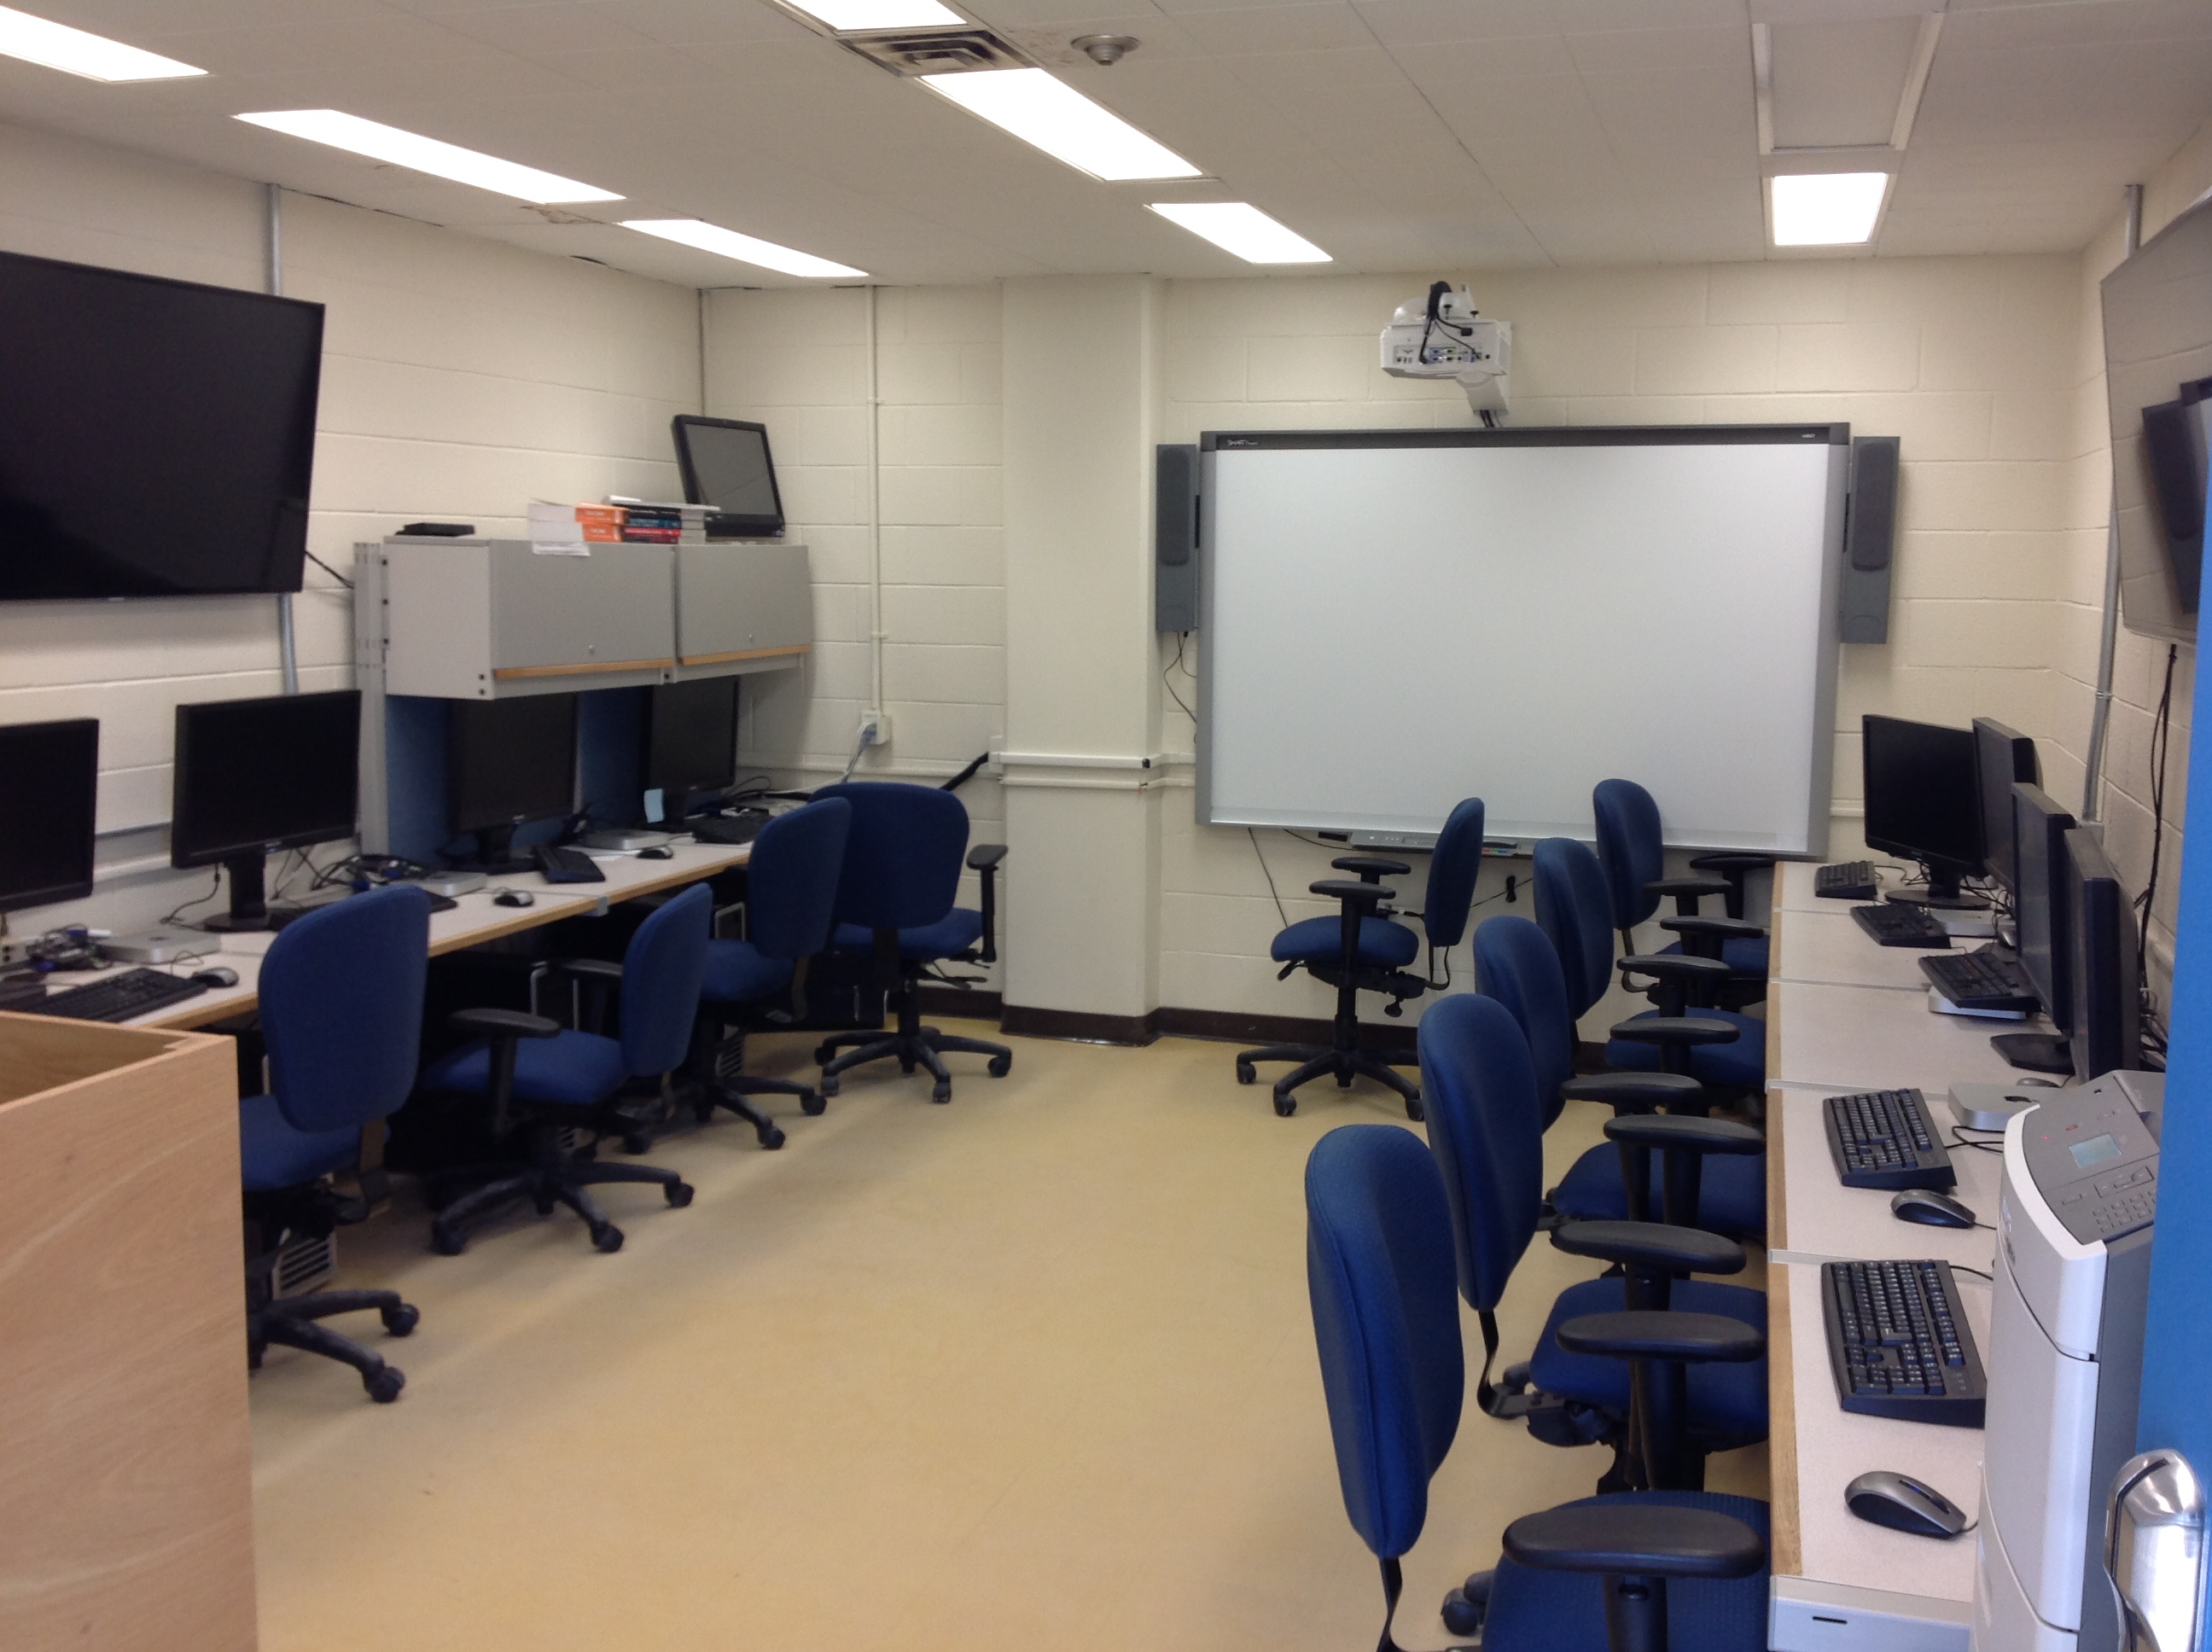 The G331 Computer Lab